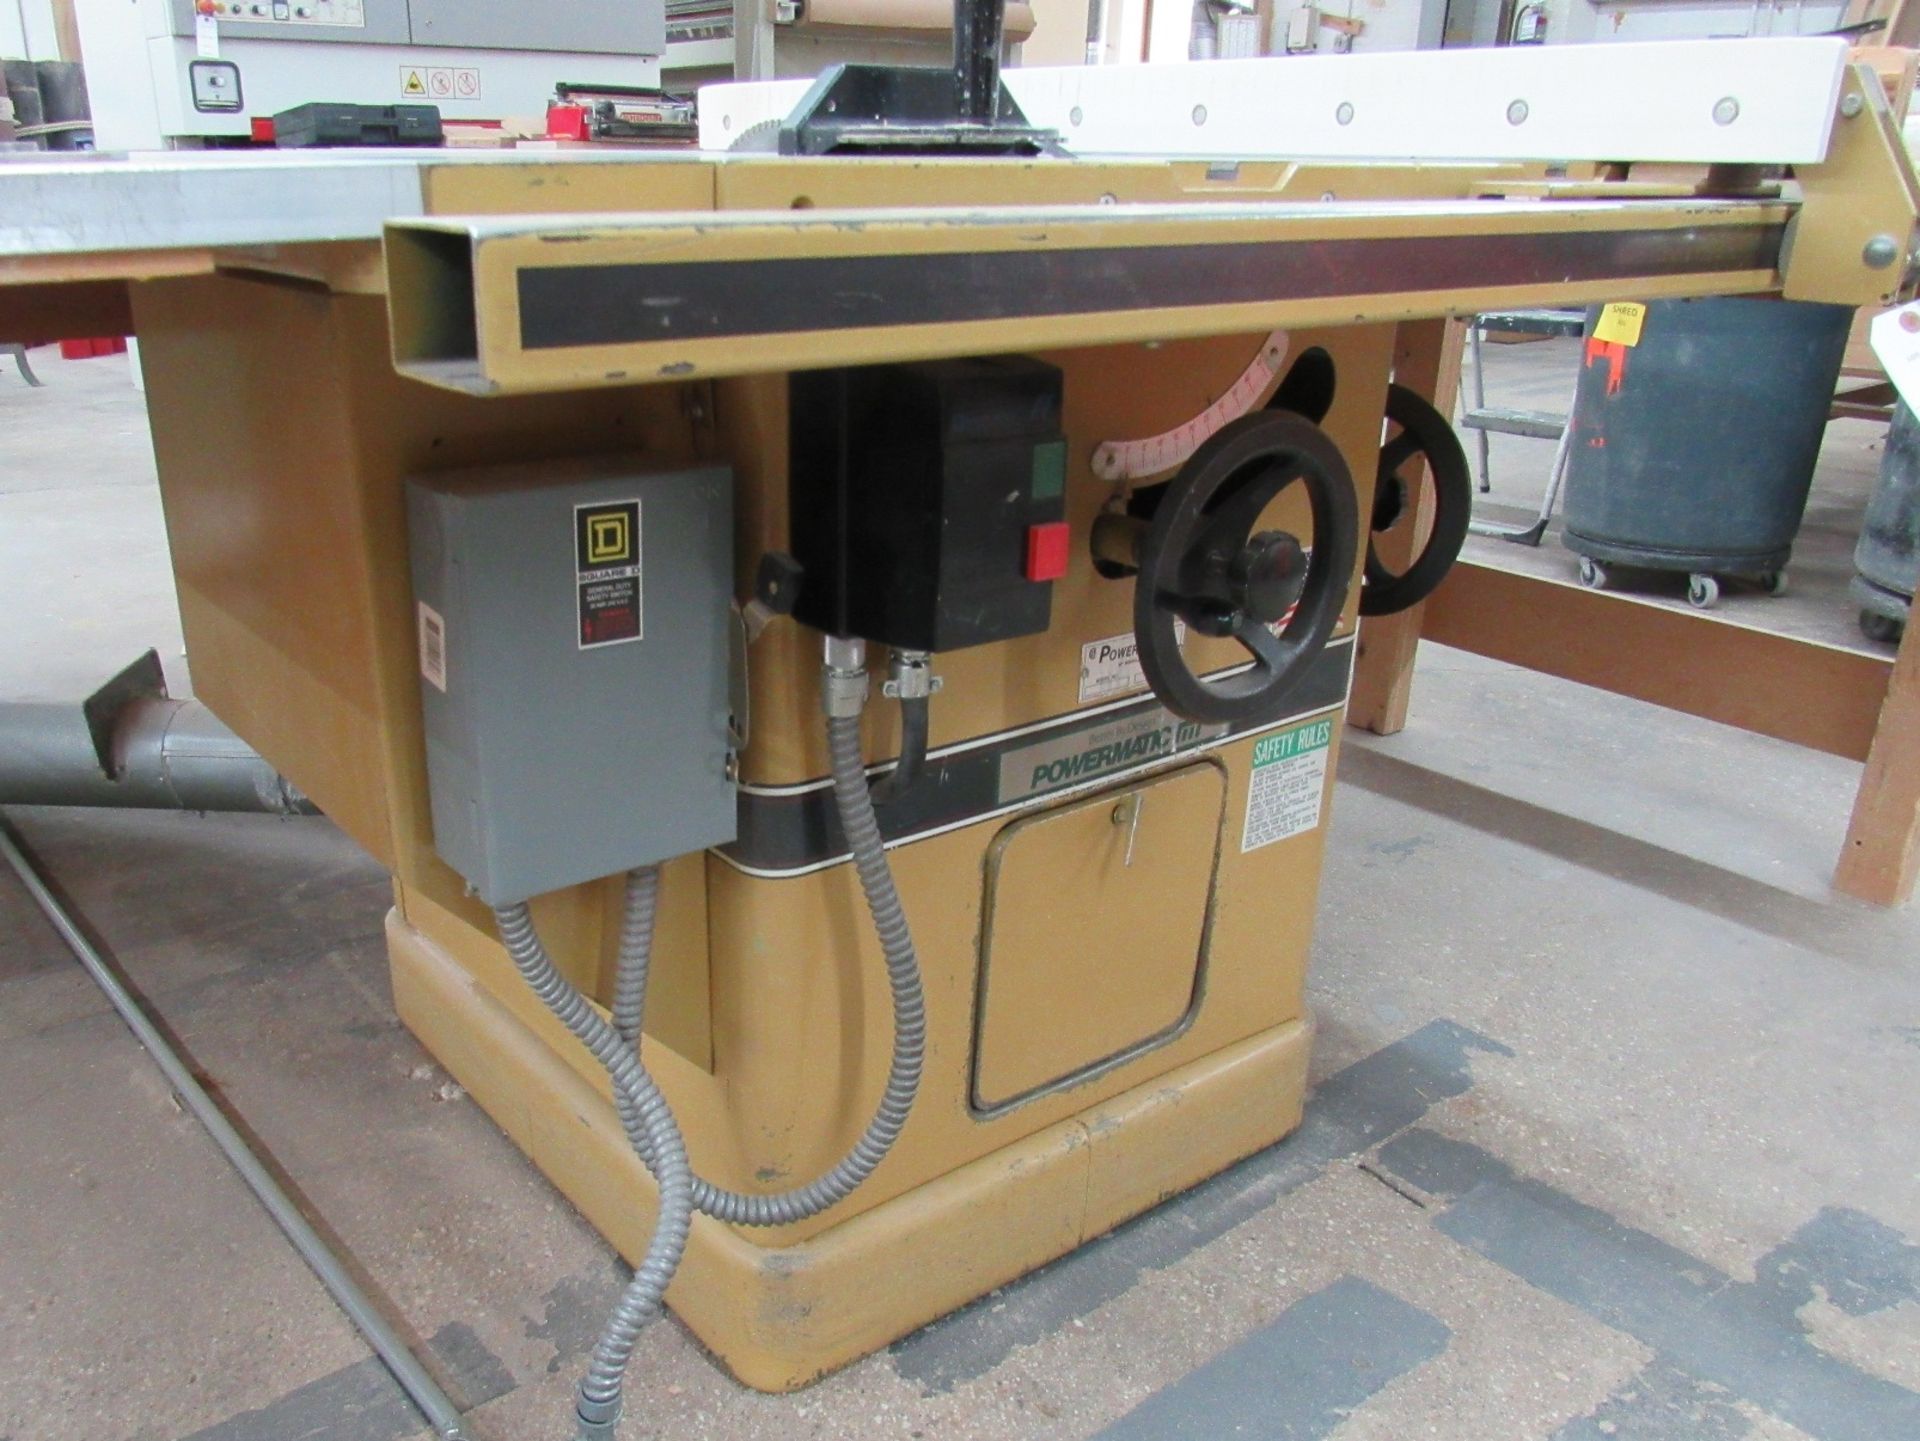 Powermatic 12"/14" Mod.72A Tilting Arbor Table Saw - S/N 9972044 (New 1999) - Image 4 of 6